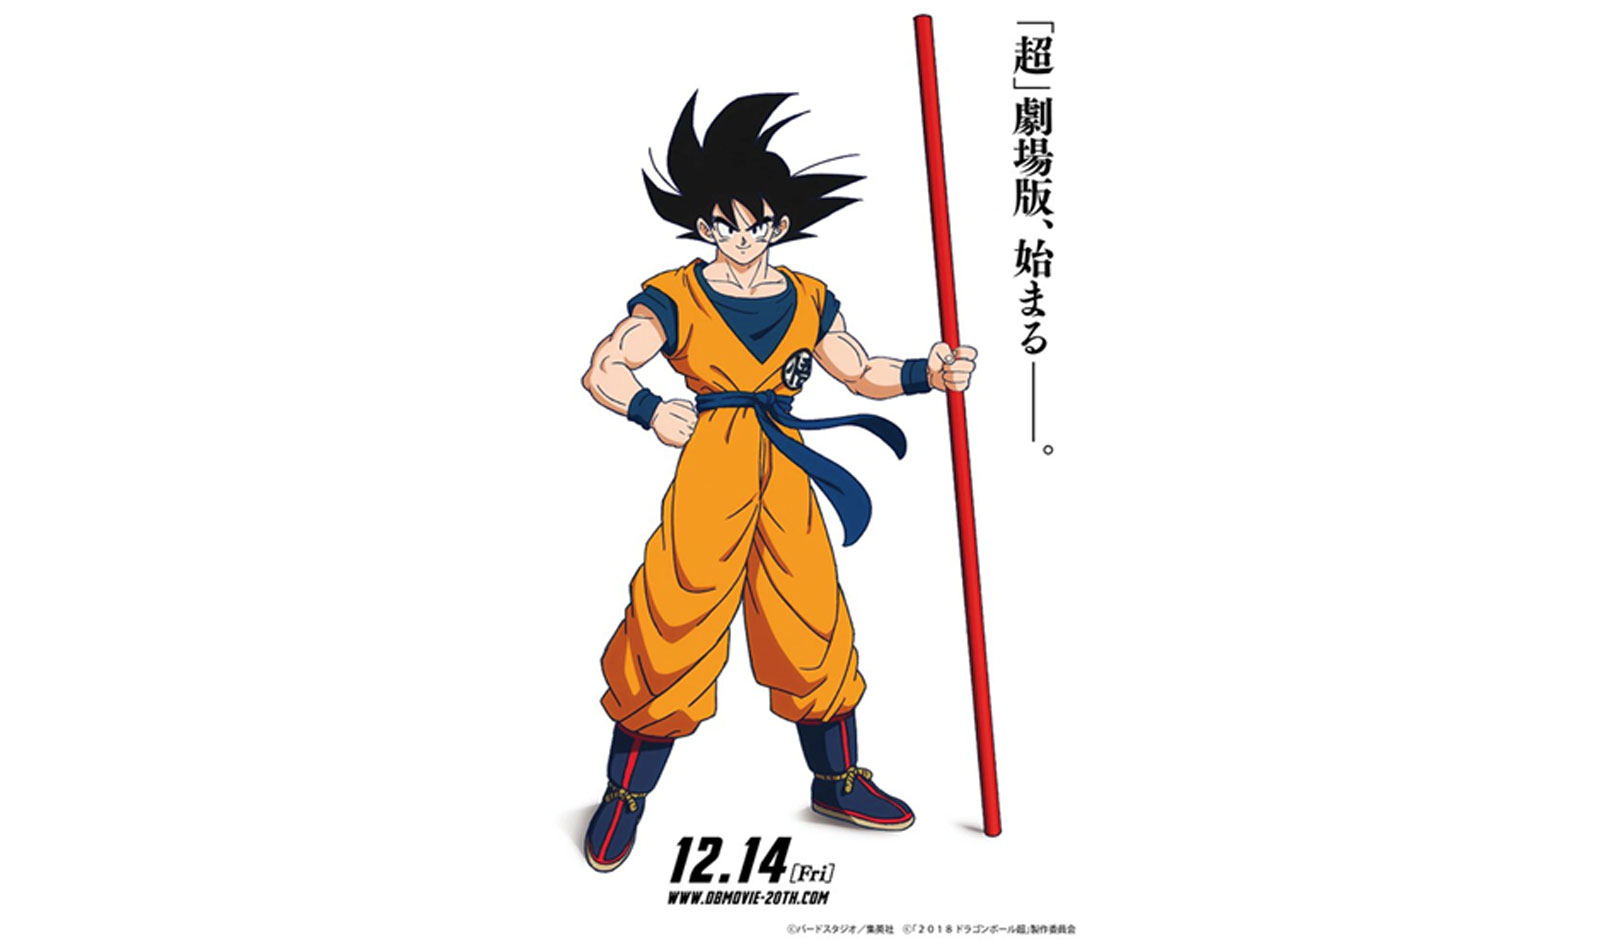 FIRST LOOK AT THE ‘DRAGON BALL SUPER’ MOVIE REVEALS THE BEST IS YET TO COME